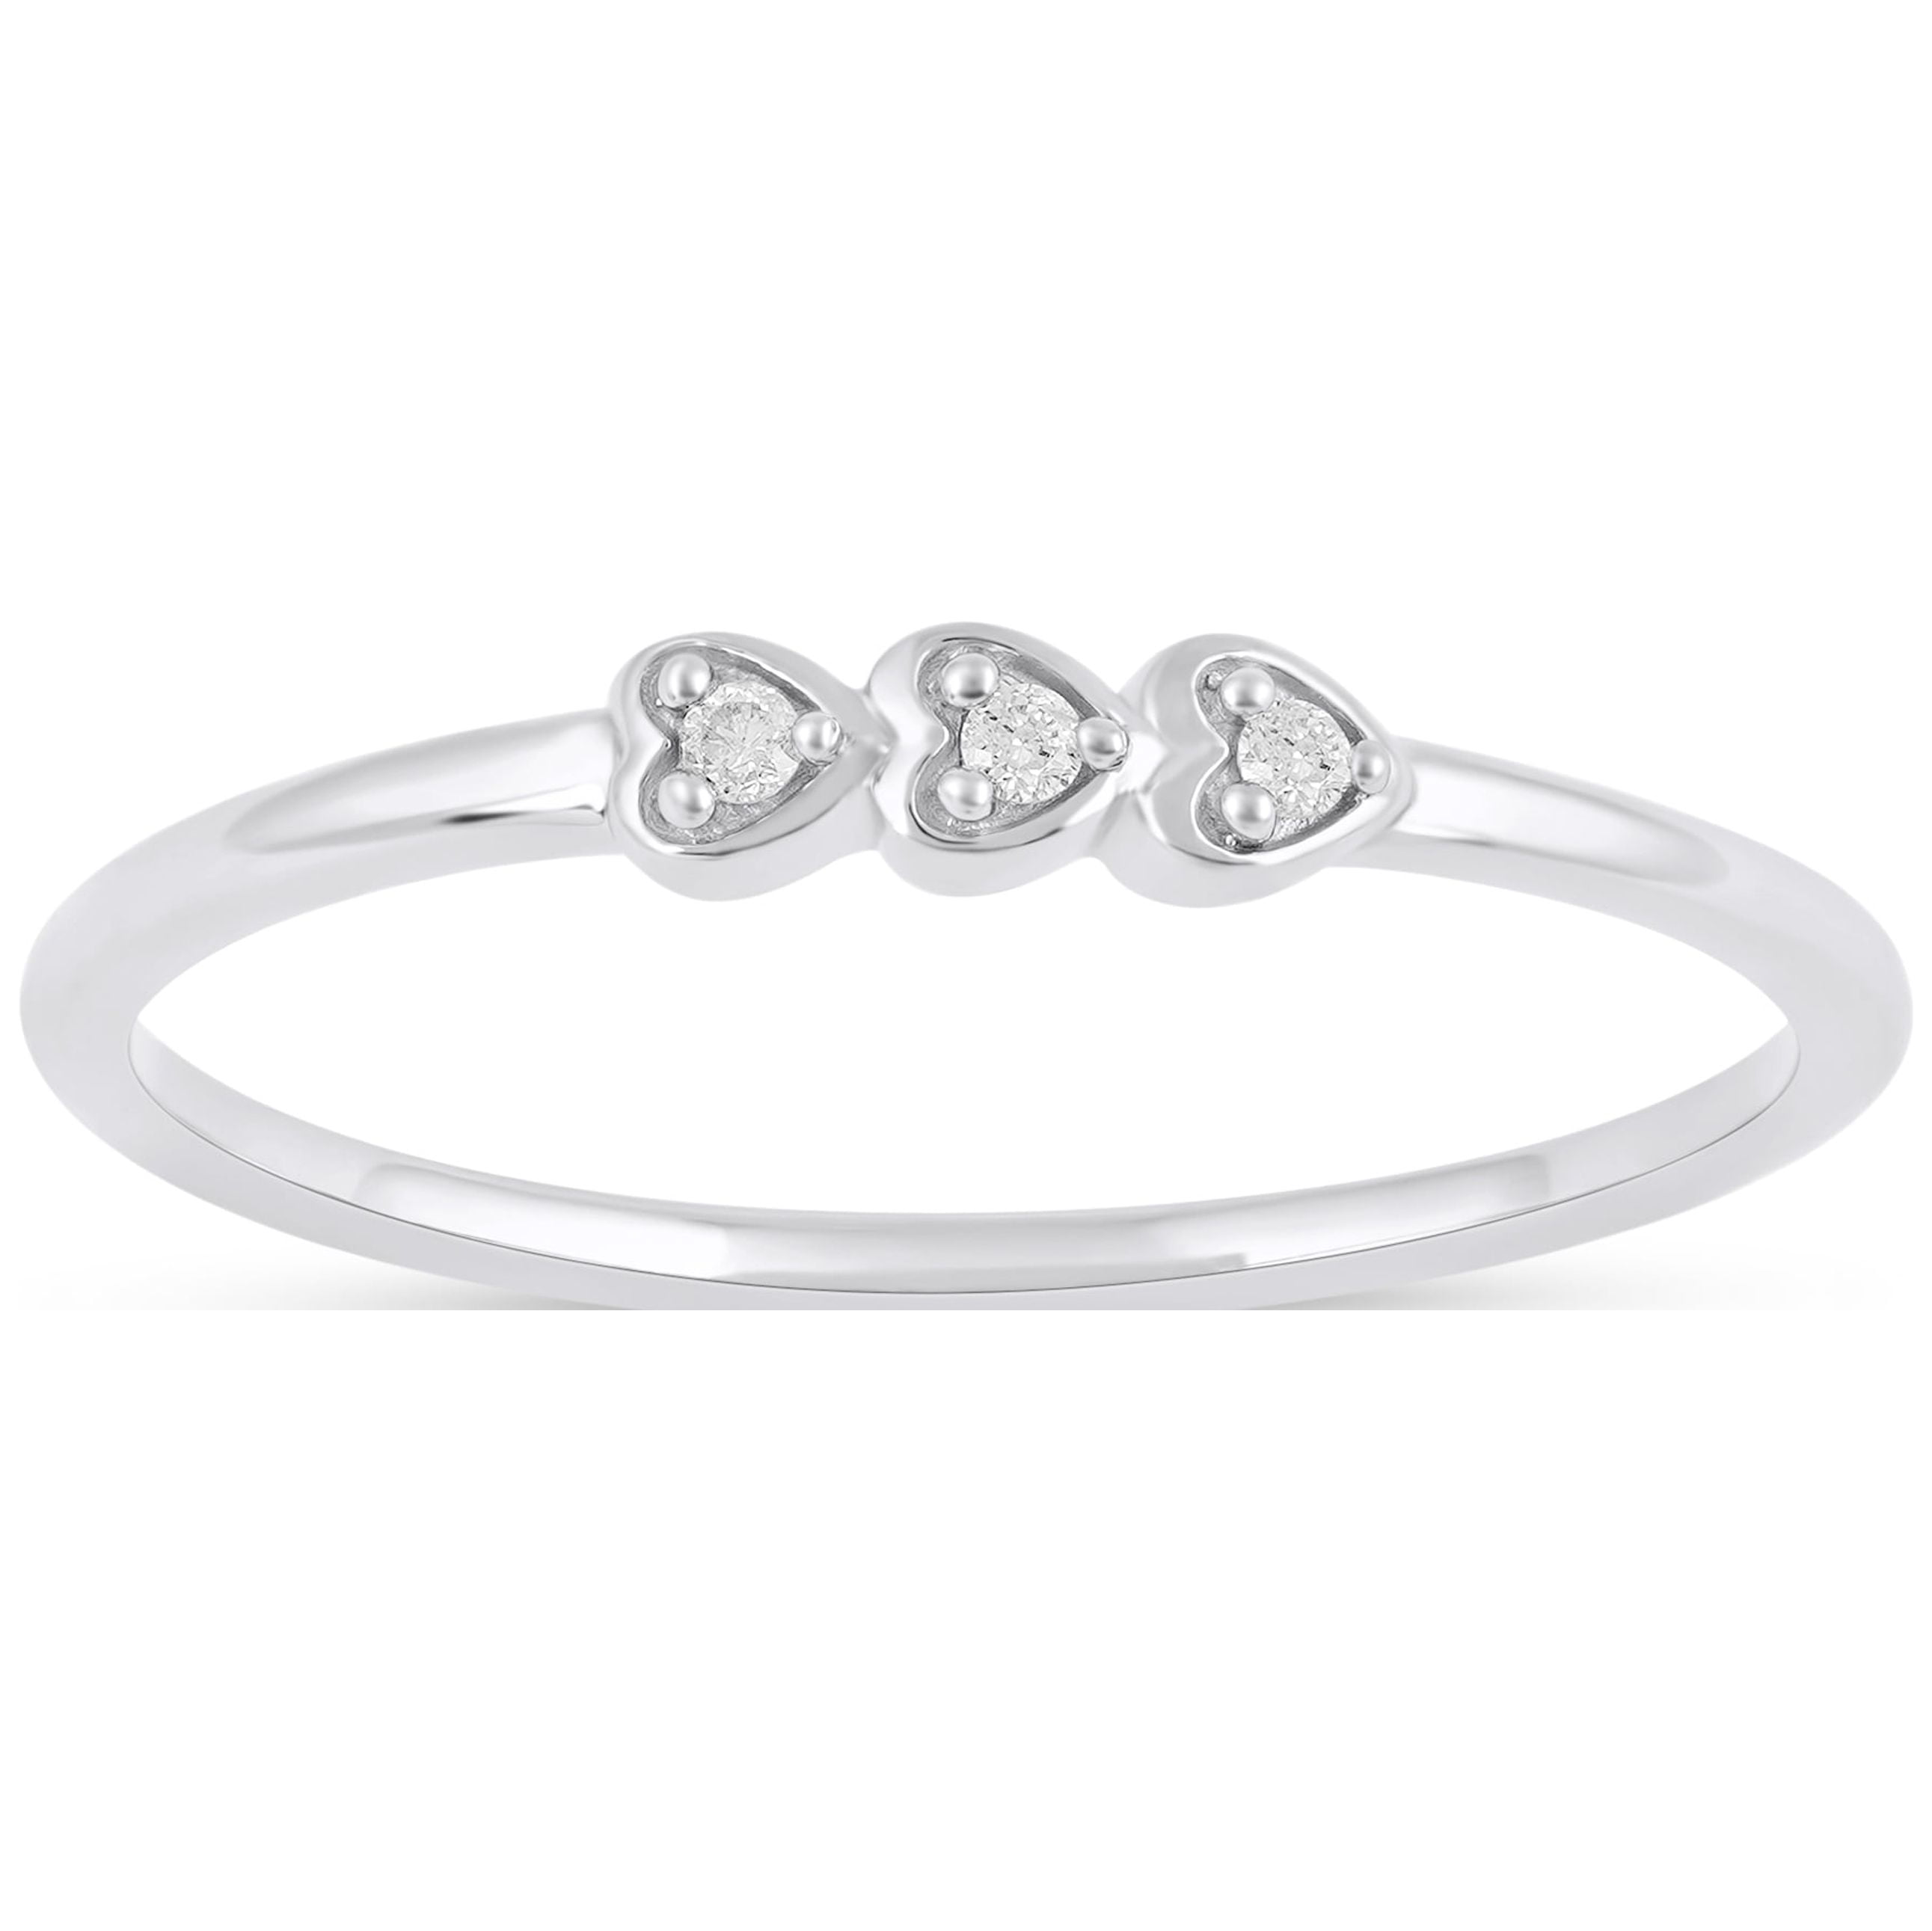 Buy quality Silver 925 double heart ring sr925-120 in Ahmedabad